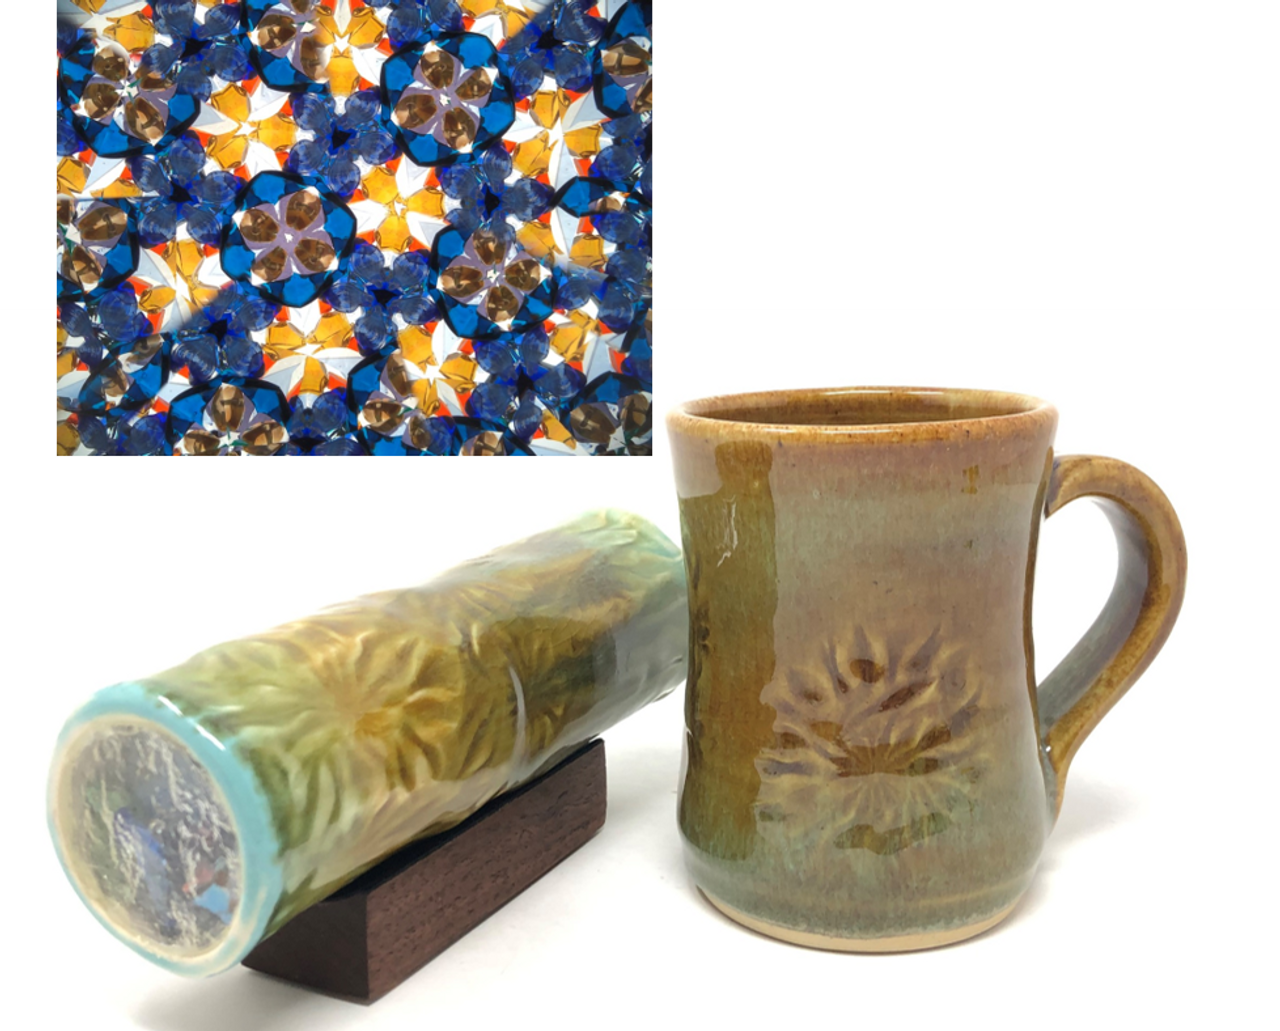 https://cdn11.bigcommerce.com/s-f5b50/images/stencil/1280x1280/products/2743/42994/Kaleidoscope_and_Coffee_Mug_set_by_Dr._Suz._group__08529.1603628229.png?c=2